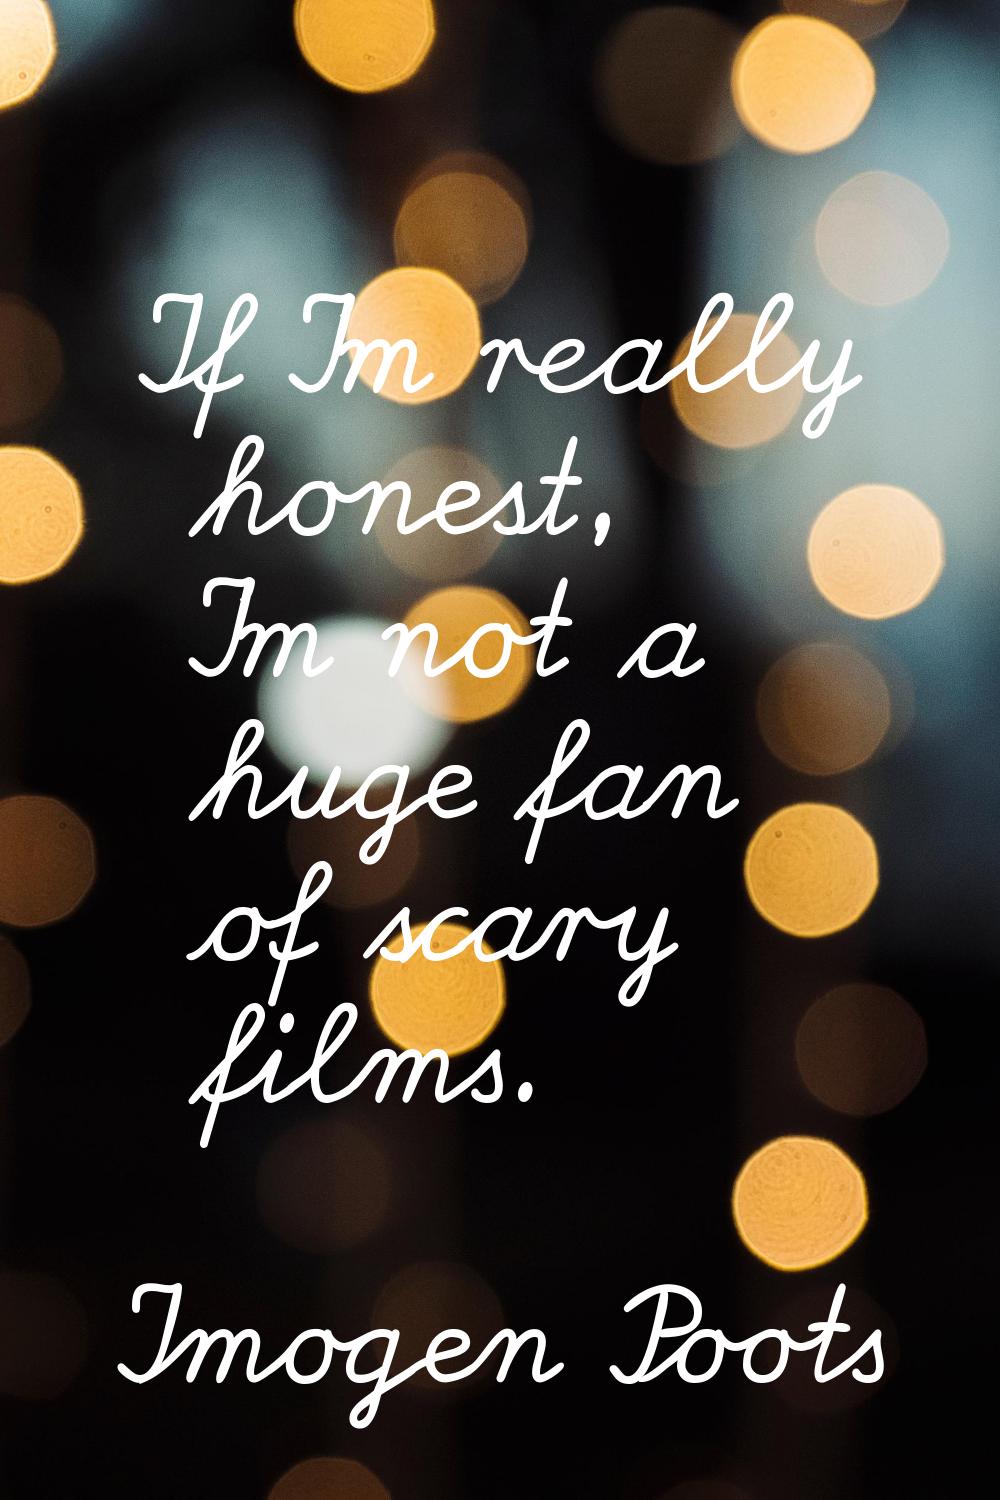 If I'm really honest, I'm not a huge fan of scary films.